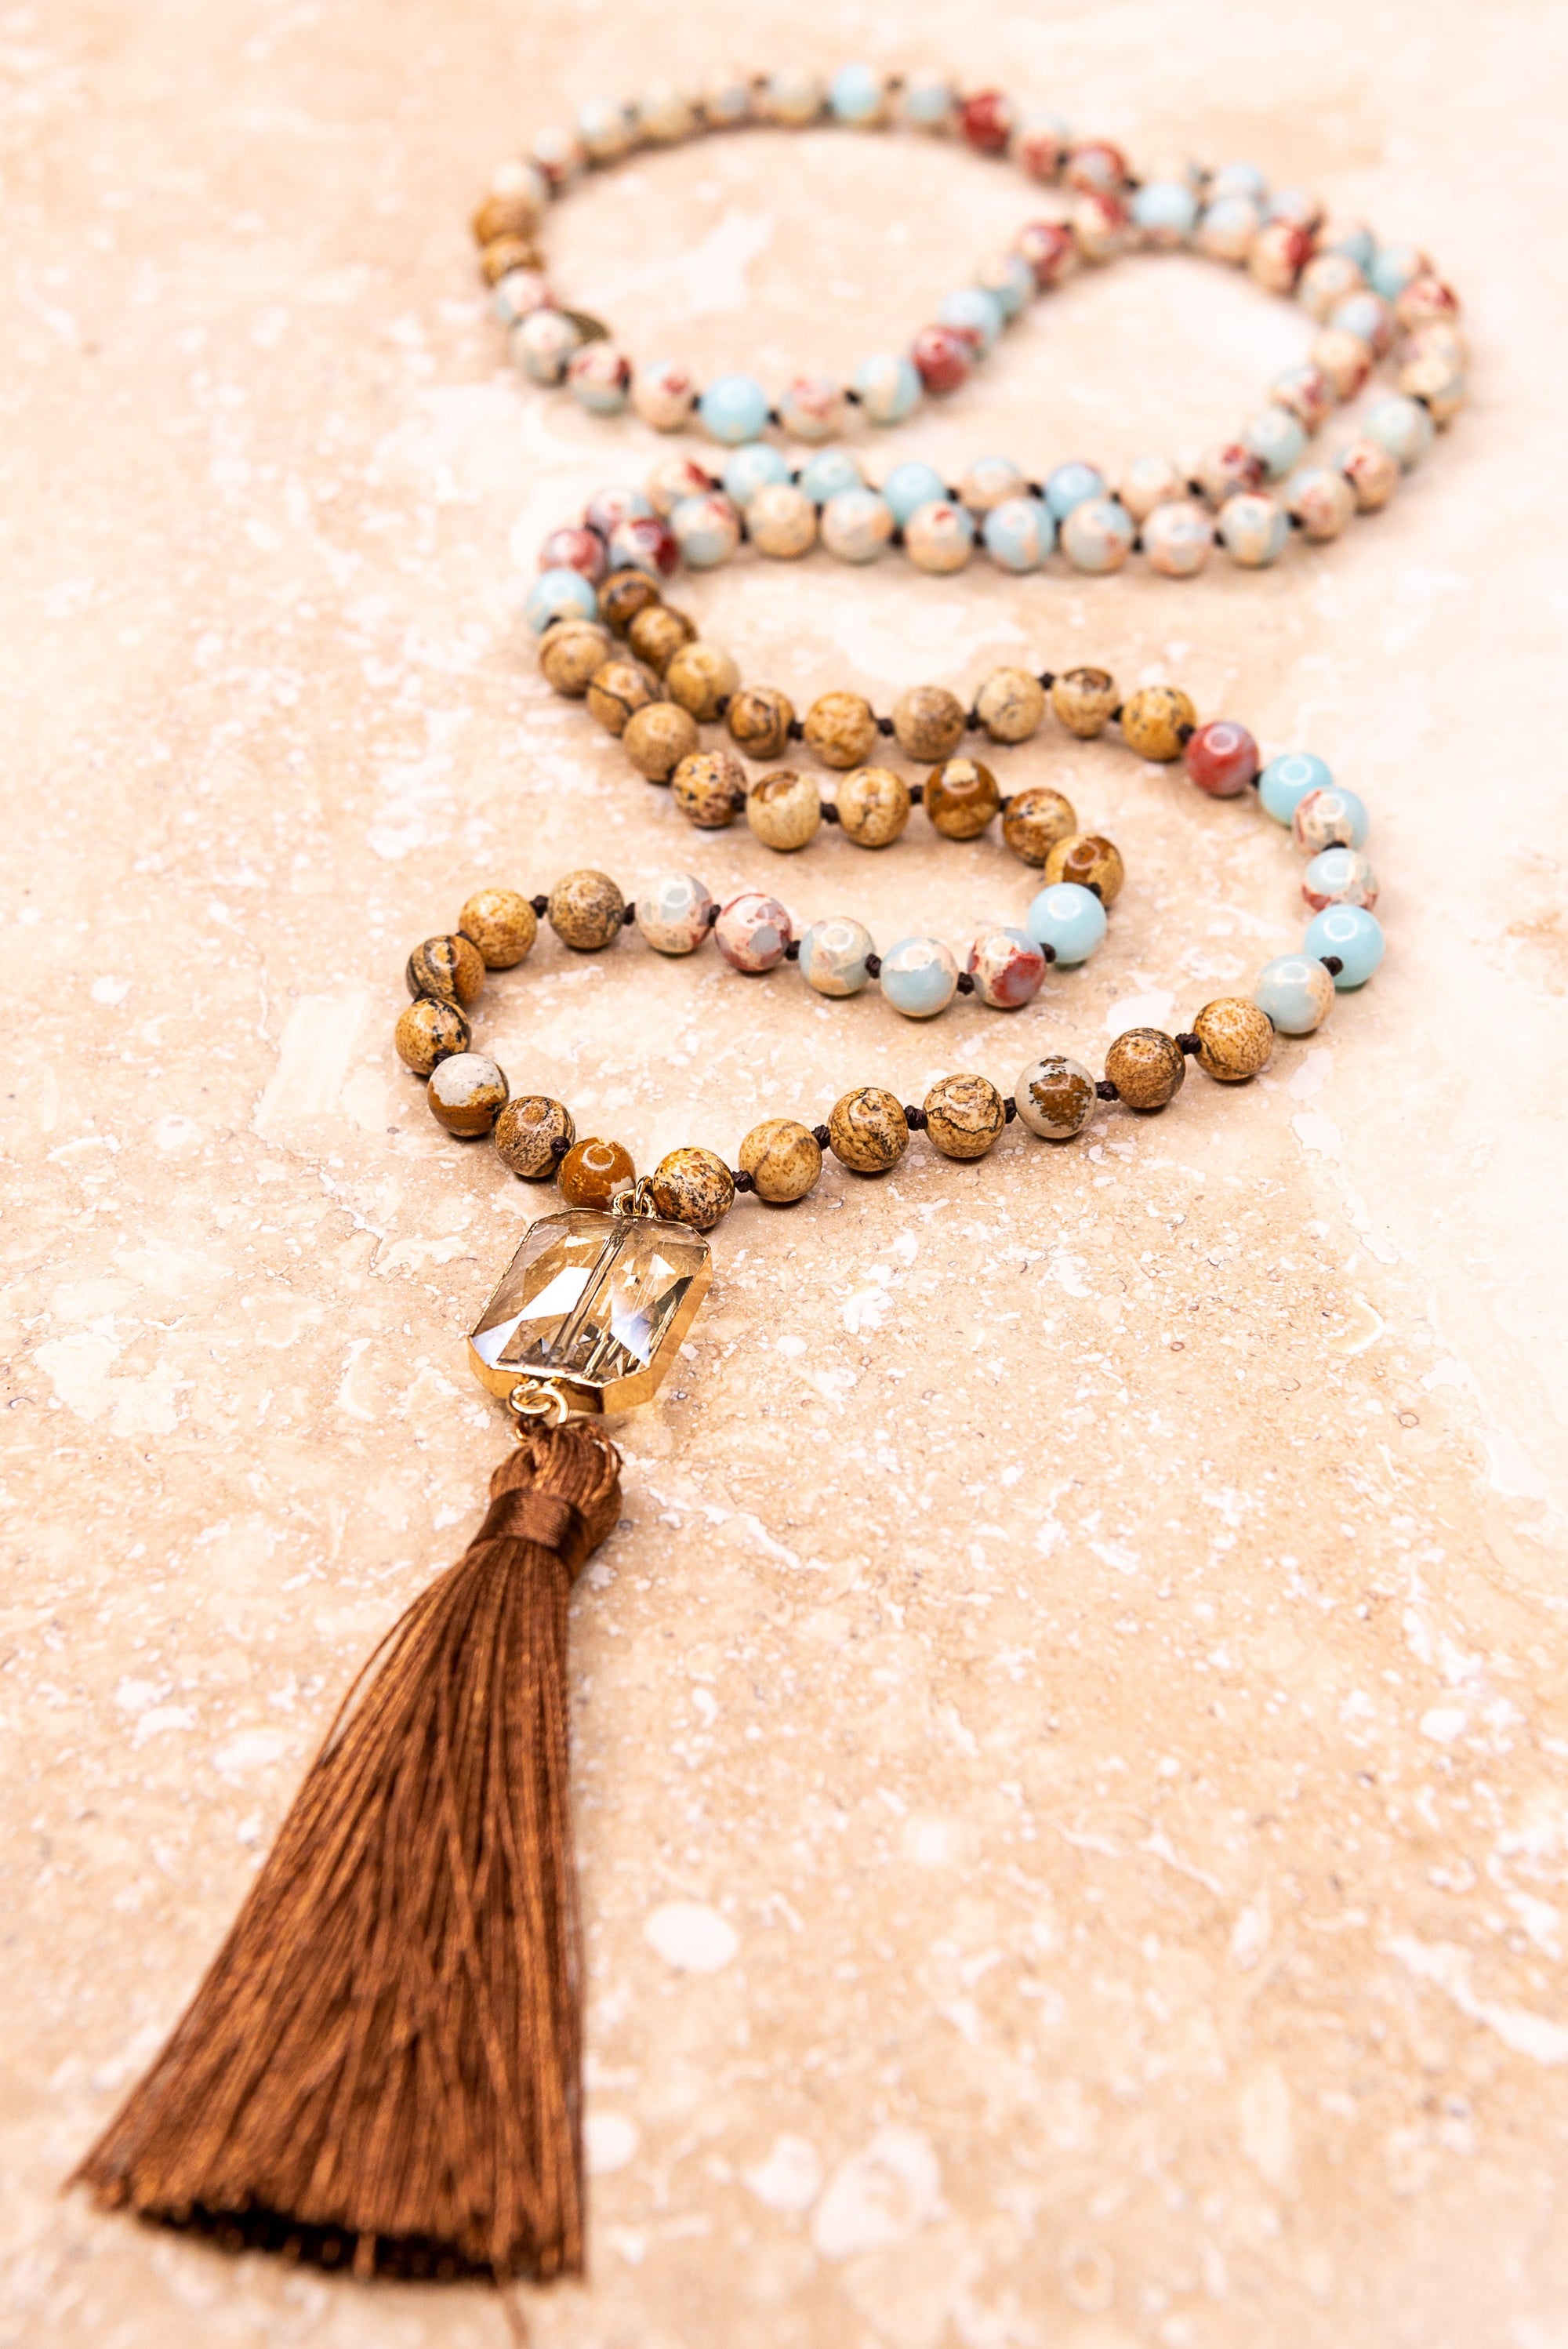 Beaded Pendant Necklace With Tassel